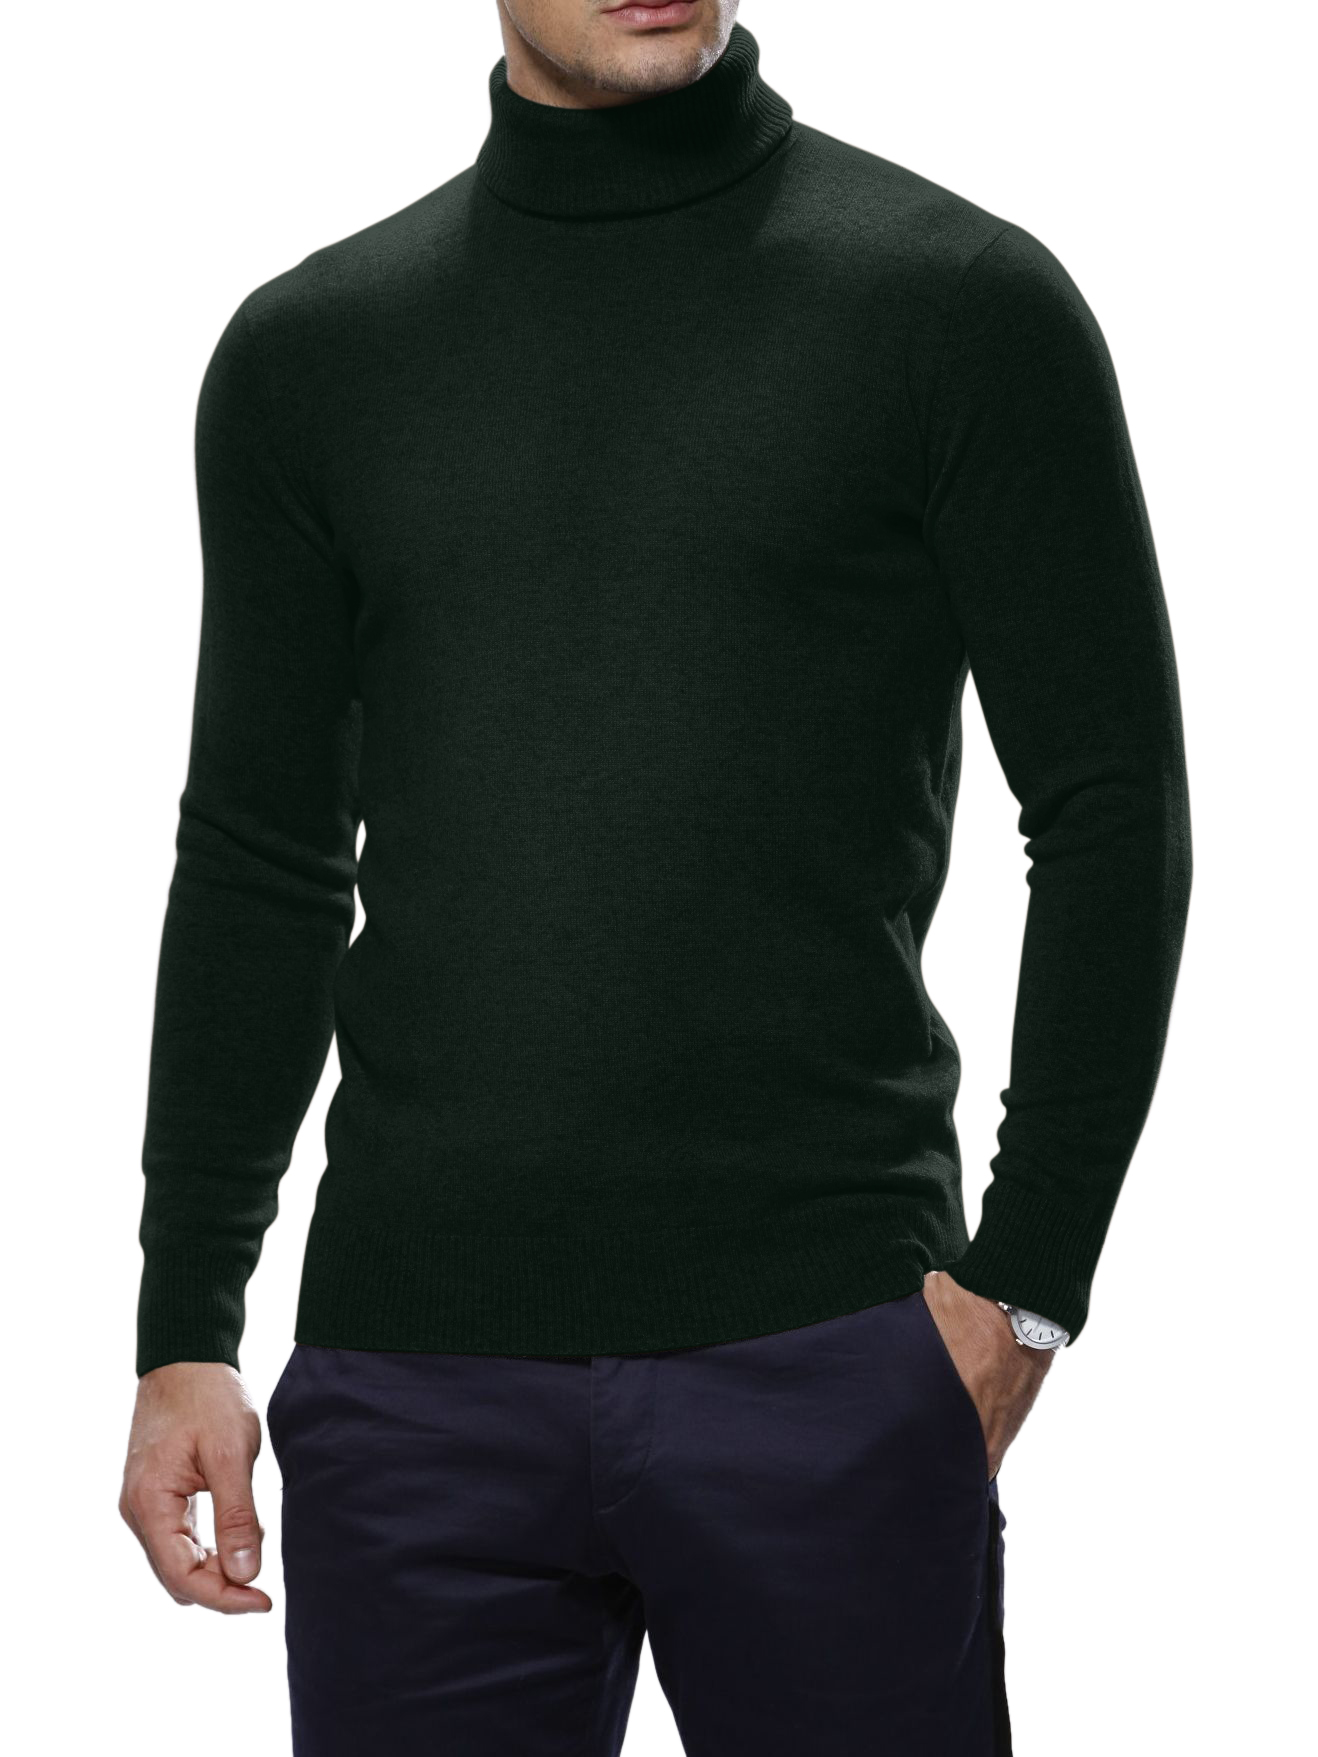 Bottle Green Cashmere Turtle Neck Sweater